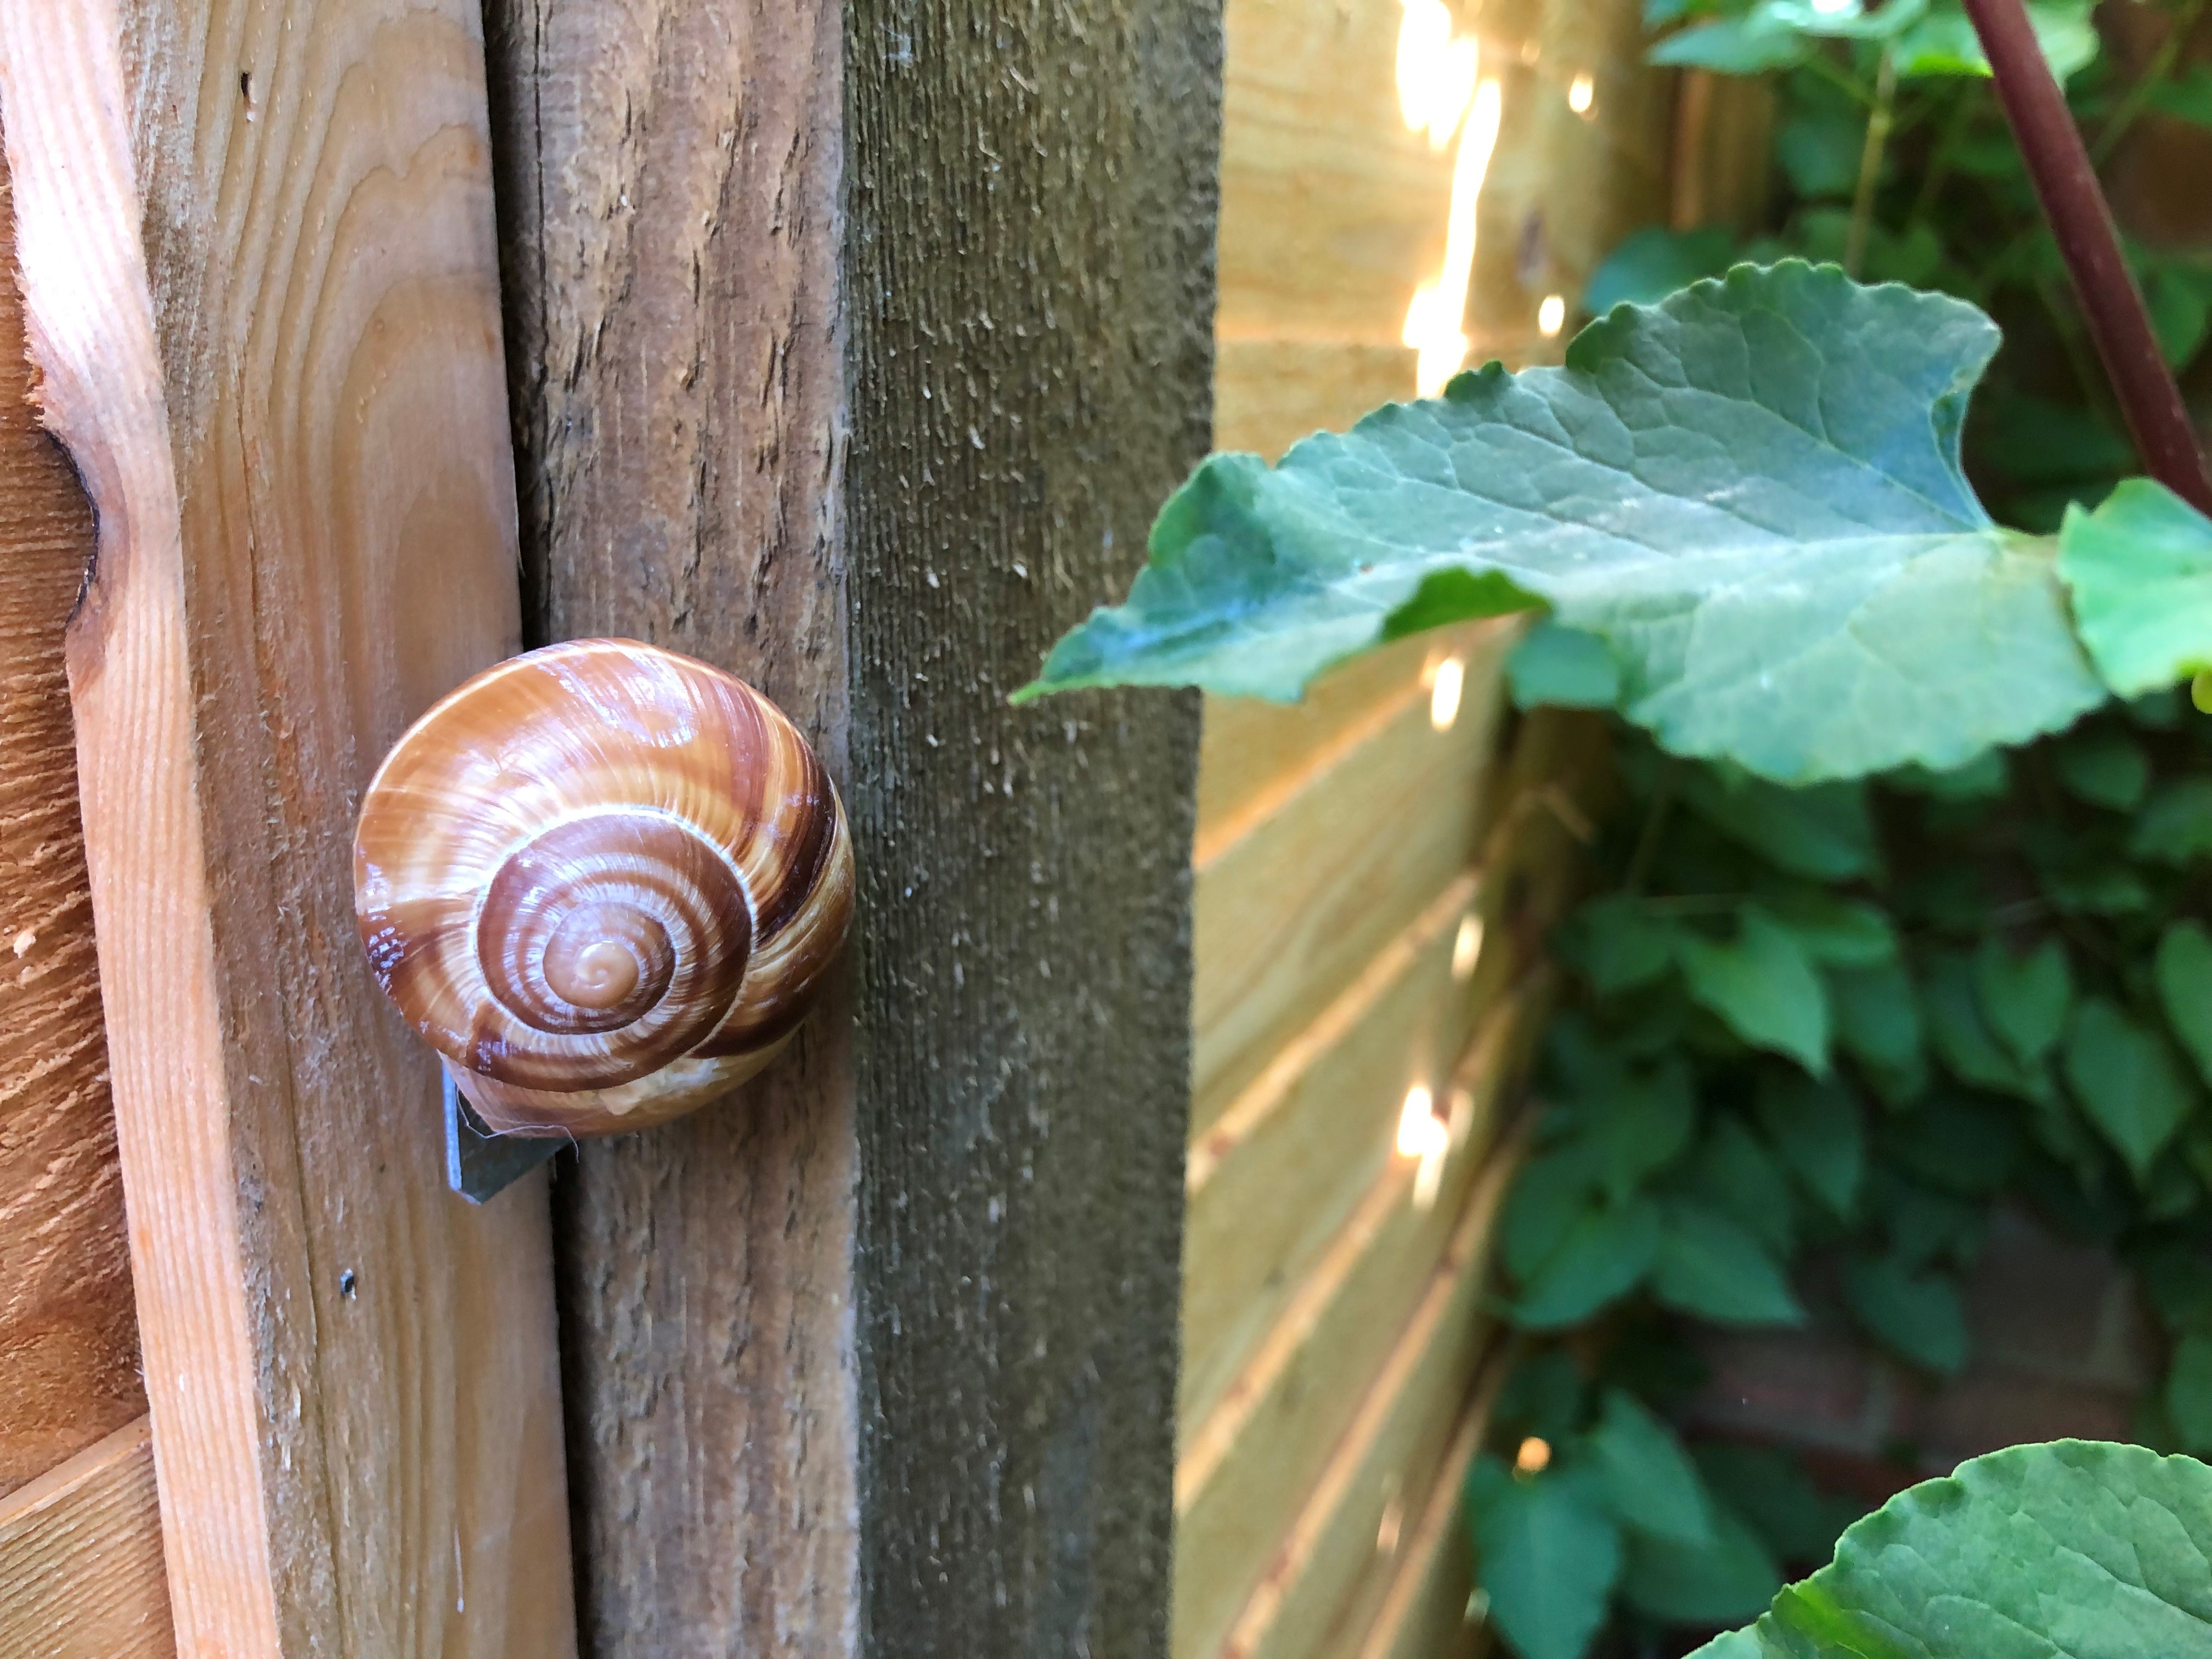 A geocache in the shape of a snail on a fence